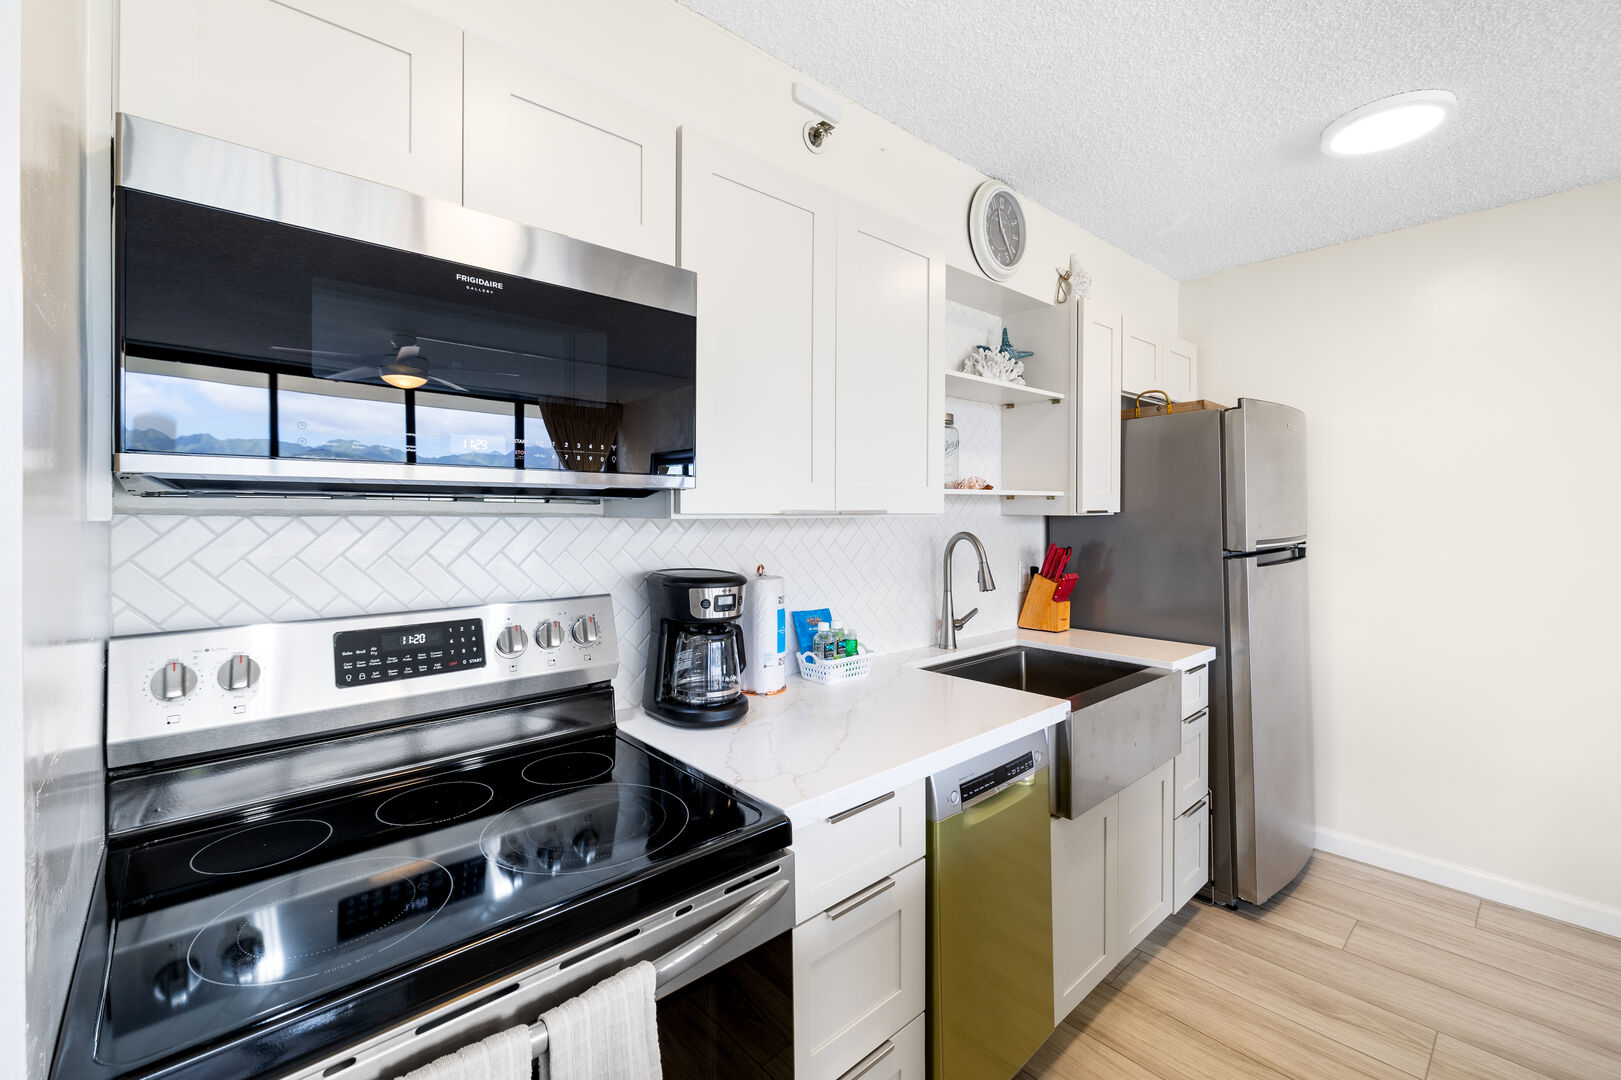 Enjoy preparing your meals in this fully-equipped kitchen!